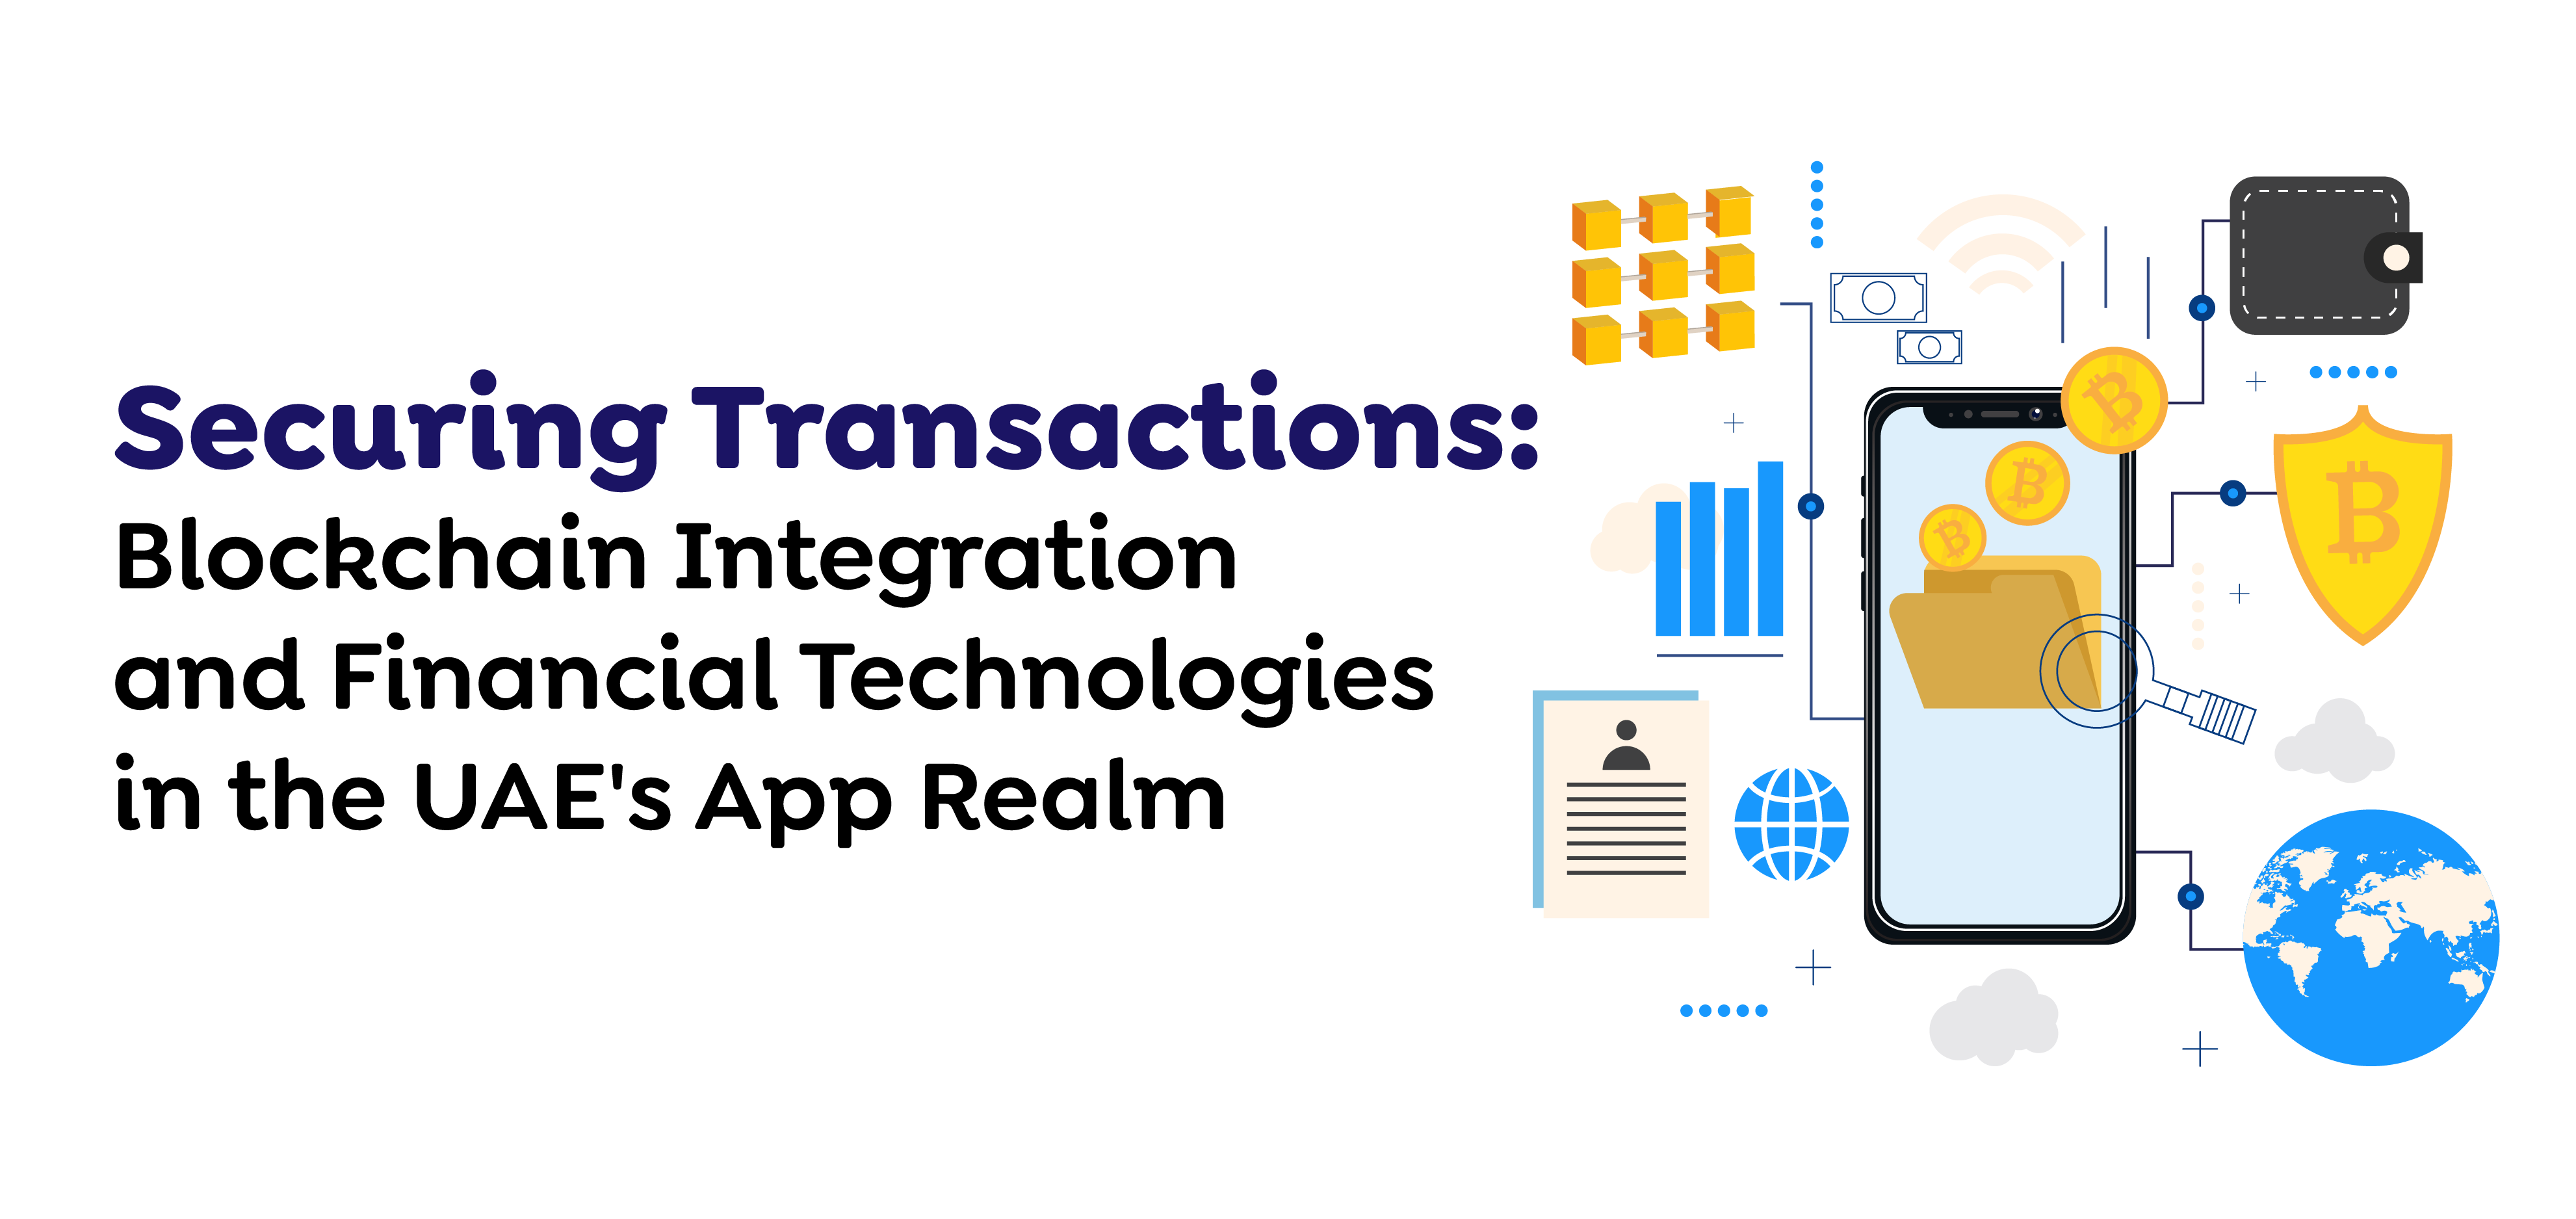 Securing Transactions- Blockchain Integration and Financial Technologies in the UAE's App Realm